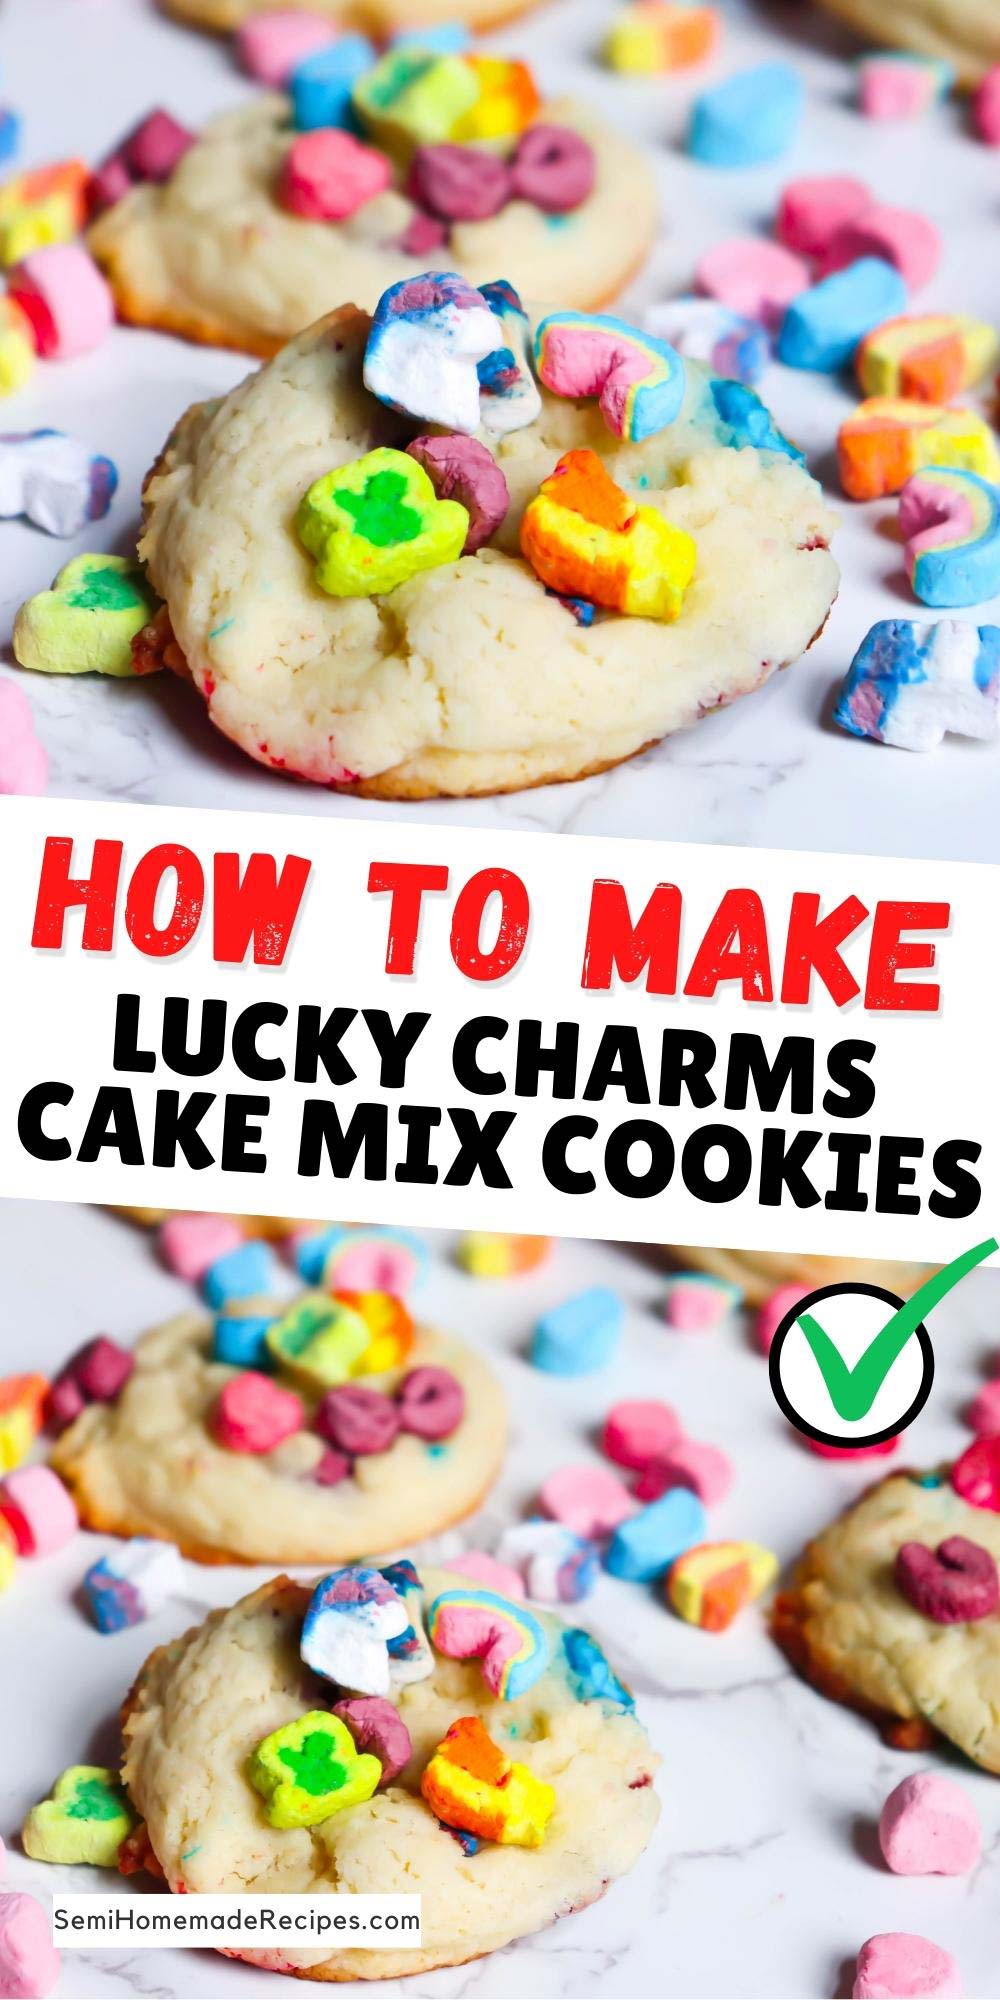 These Lucky Charms Cake Mix Cookies are soft, vanilla and full of Lucky Charm Marshmallows. White cake mix if the base for these cookies which makes them super fast to make! 